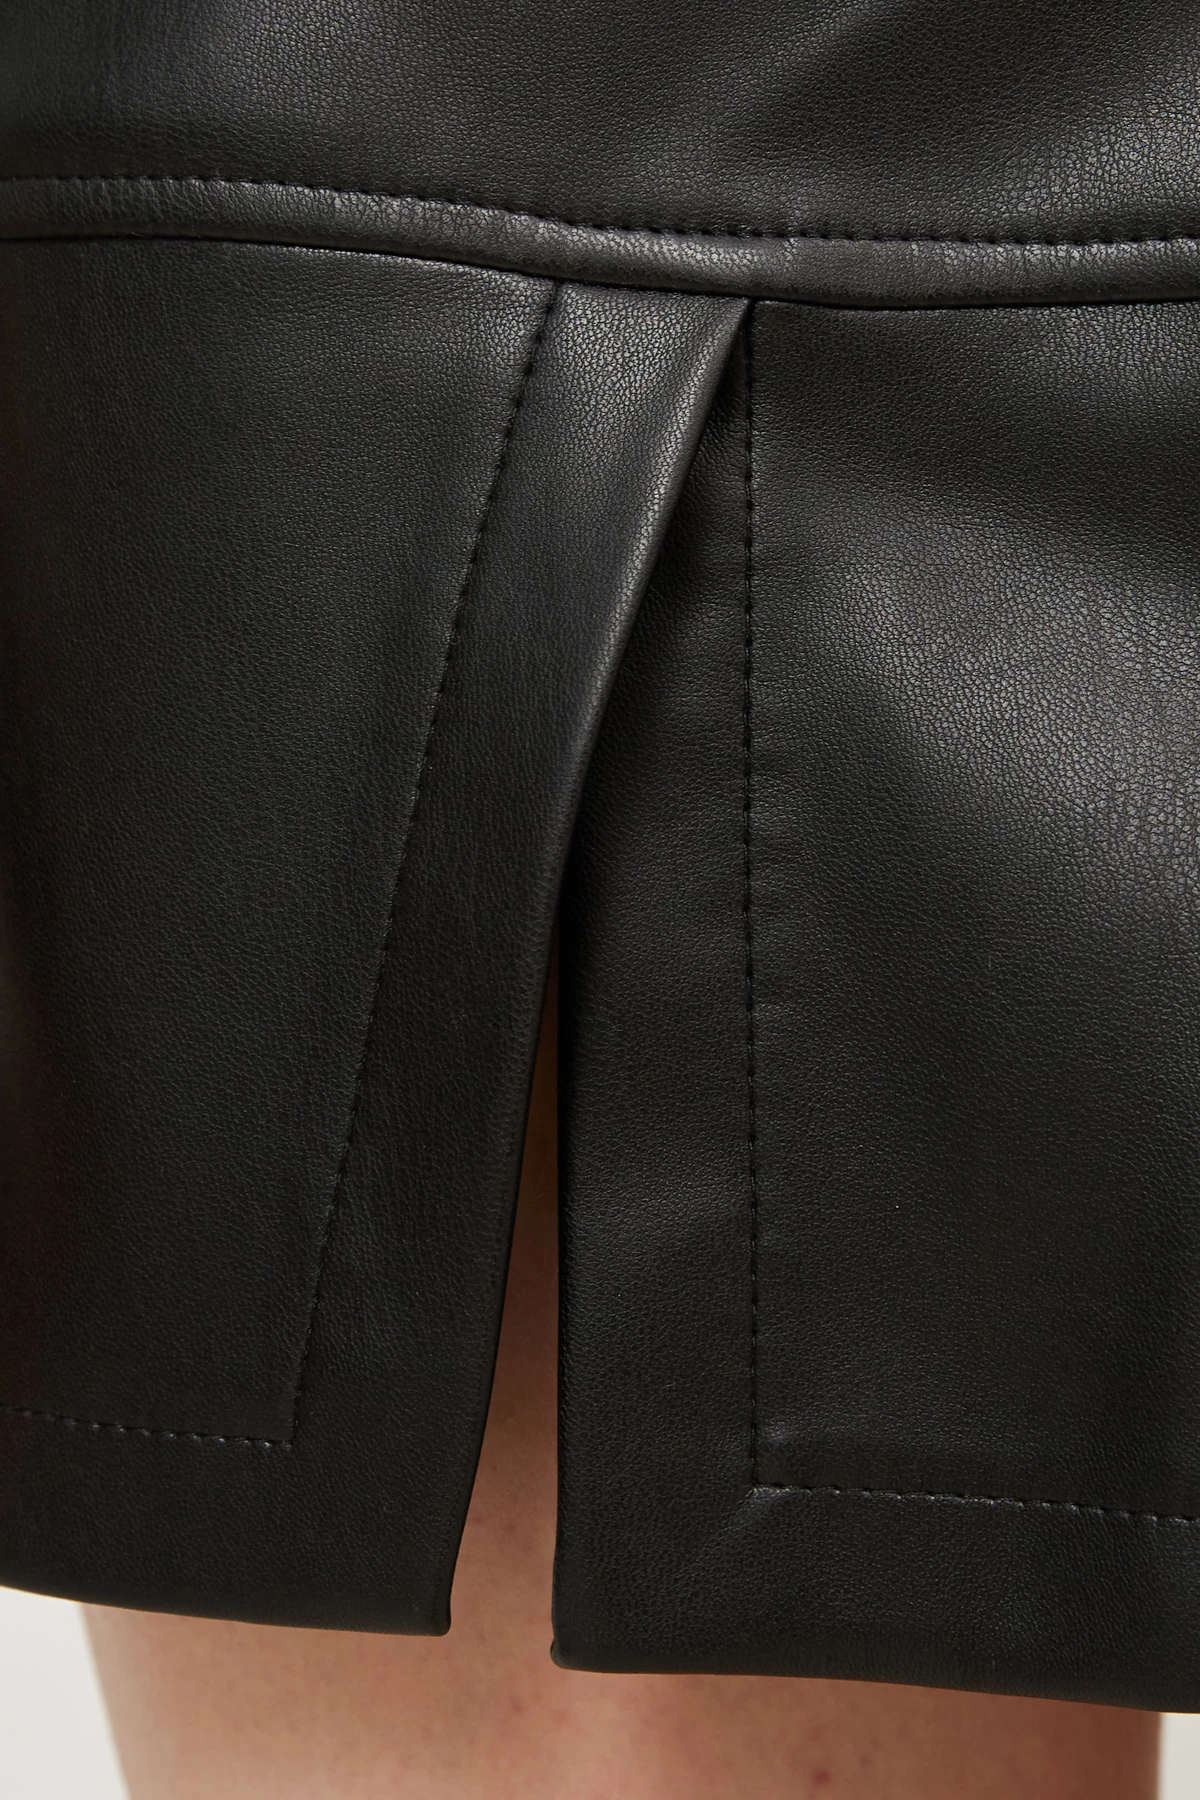 Short skirt in black eco-leather, photo 3